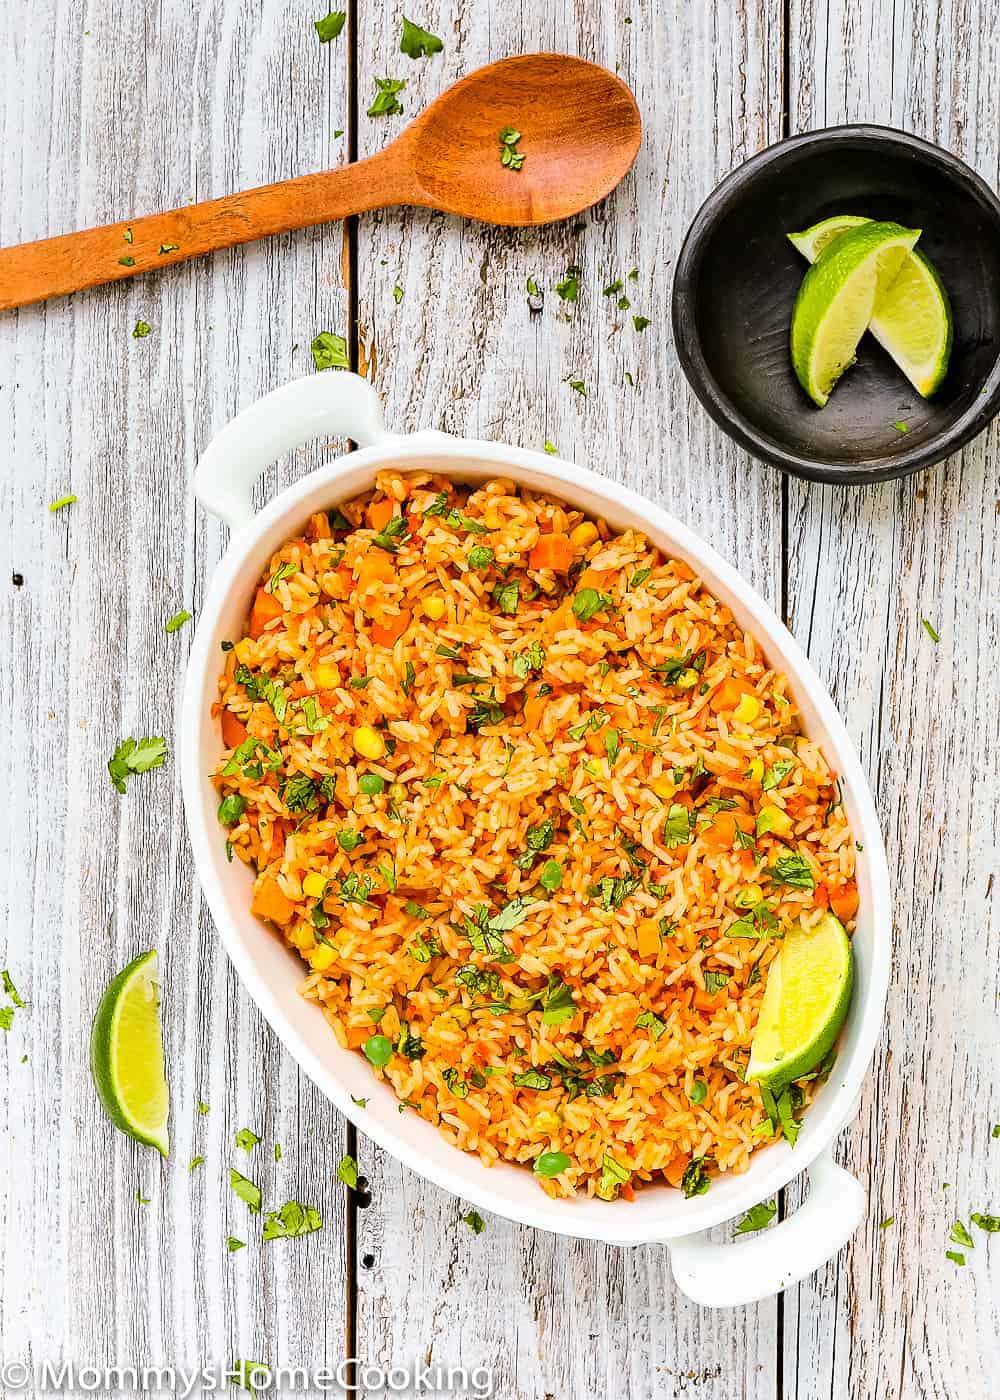 This Easy Mexican Rice is light, fluffy, and flavorful! The best part is that everything gets tossed into the rice cooker, you walk away, and the magic happens in minutes. https://mommyshomecooking.com